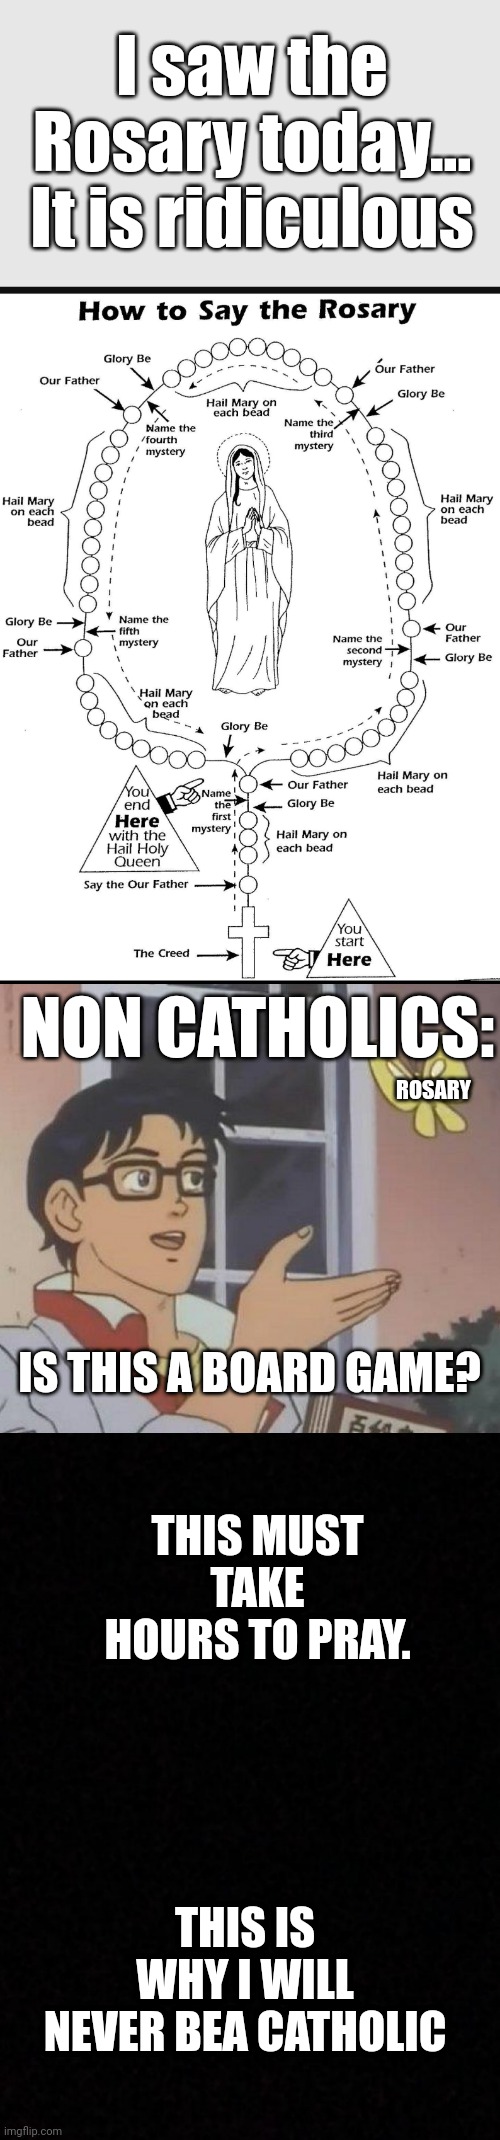 Meme #168 |  I saw the Rosary today... It is ridiculous; NON CATHOLICS:; ROSARY; IS THIS A BOARD GAME? THIS MUST TAKE HOURS TO PRAY. THIS IS WHY I WILL NEVER BEA CATHOLIC | image tagged in memes,is this a pigeon,blank,catholic,catholicism,funny | made w/ Imgflip meme maker